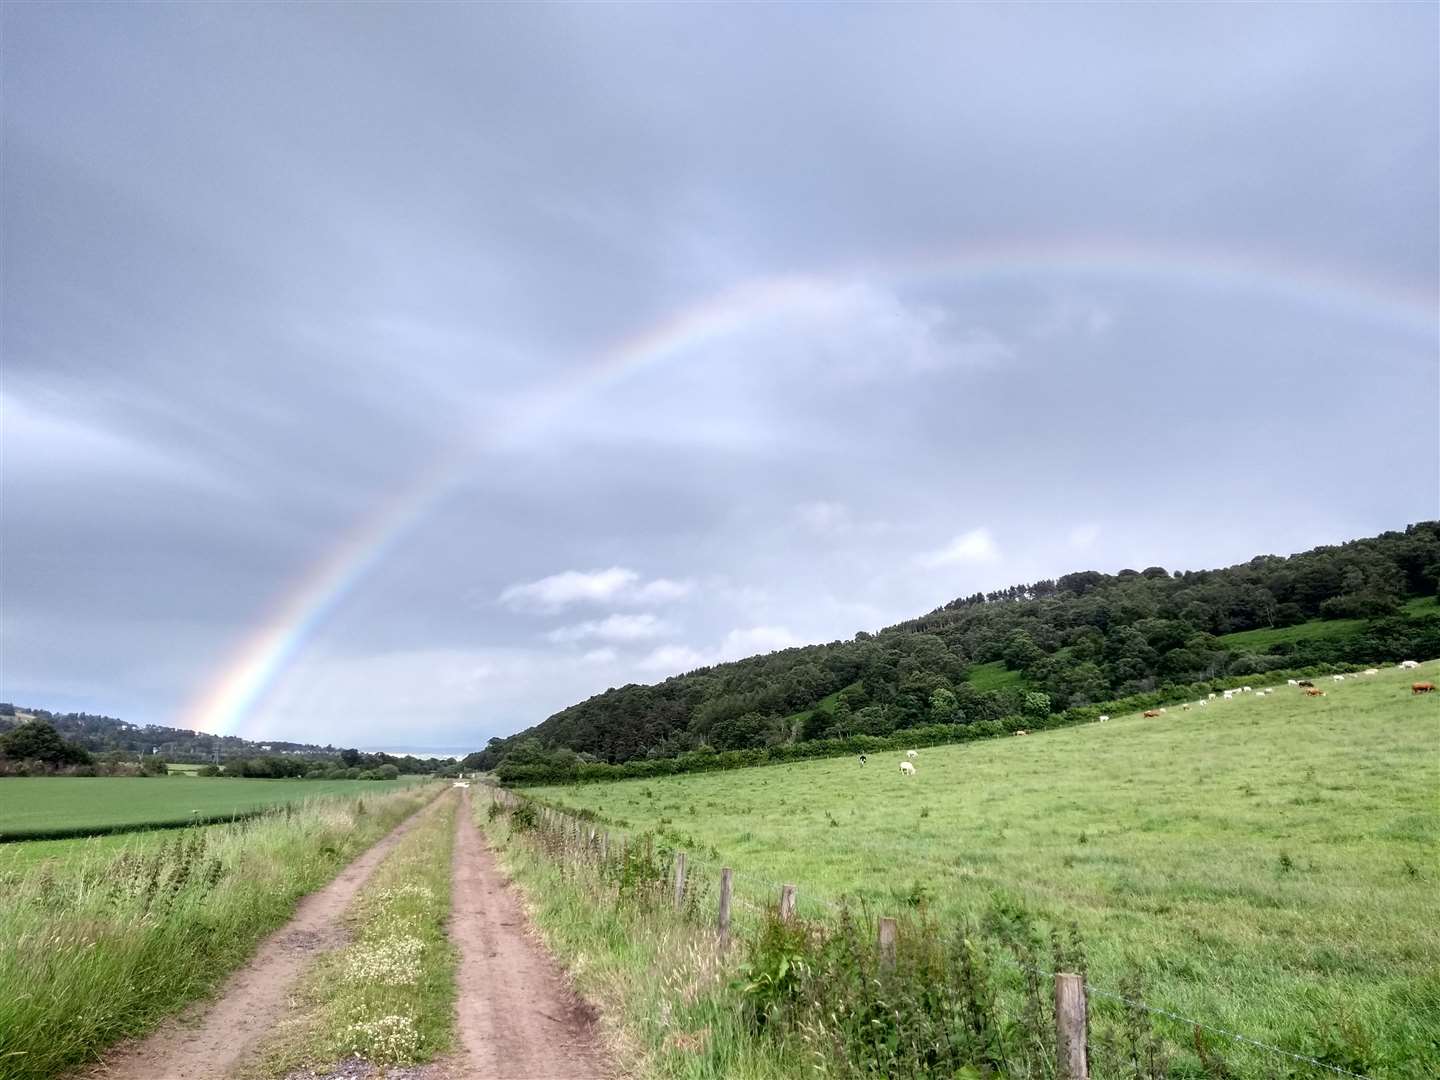 A rainbow over Dingwall as seen from the Peffery Way at Fodderty. Picutre by Angela Radin.